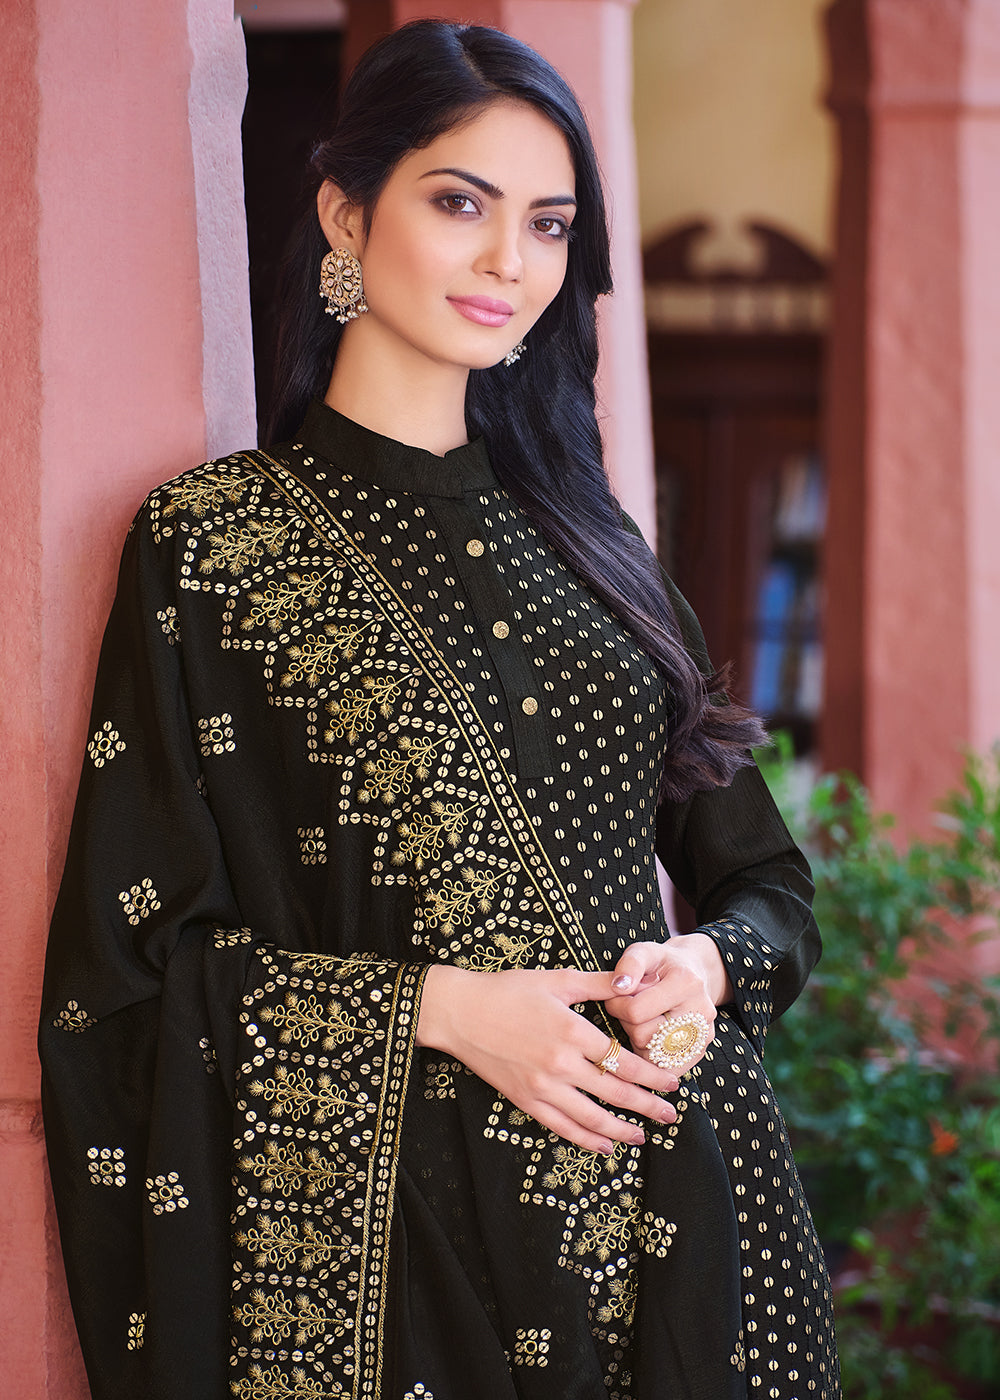 Buy Now Classic Black Pakistani Pant Style Chinon Salwar Suit Online in USA, UK, Canada, Germany & Worldwide at Empress Clothing.